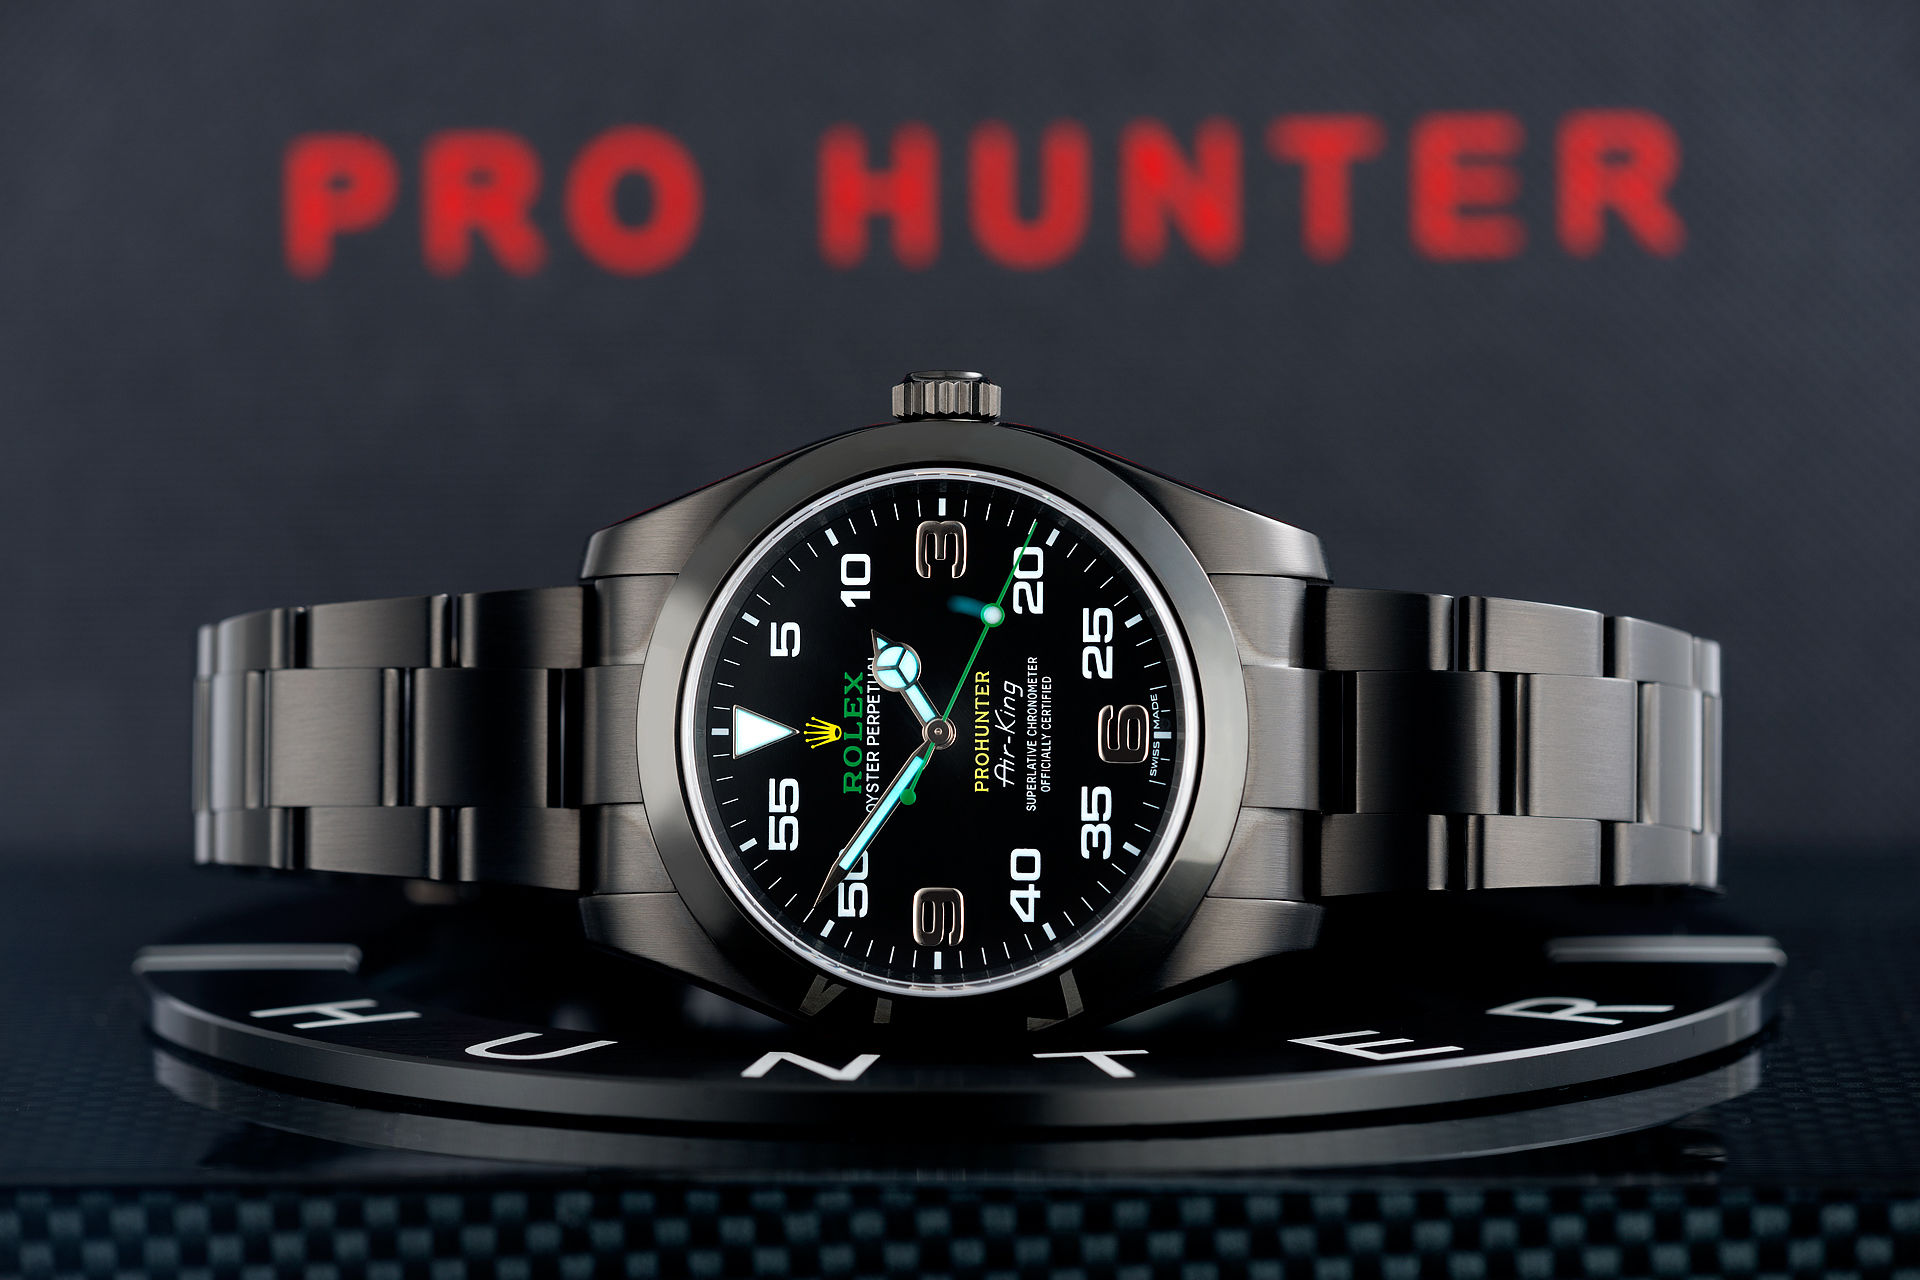 ref 116900 | 001 of 100 Limited Edition | Pro Hunter Air-King